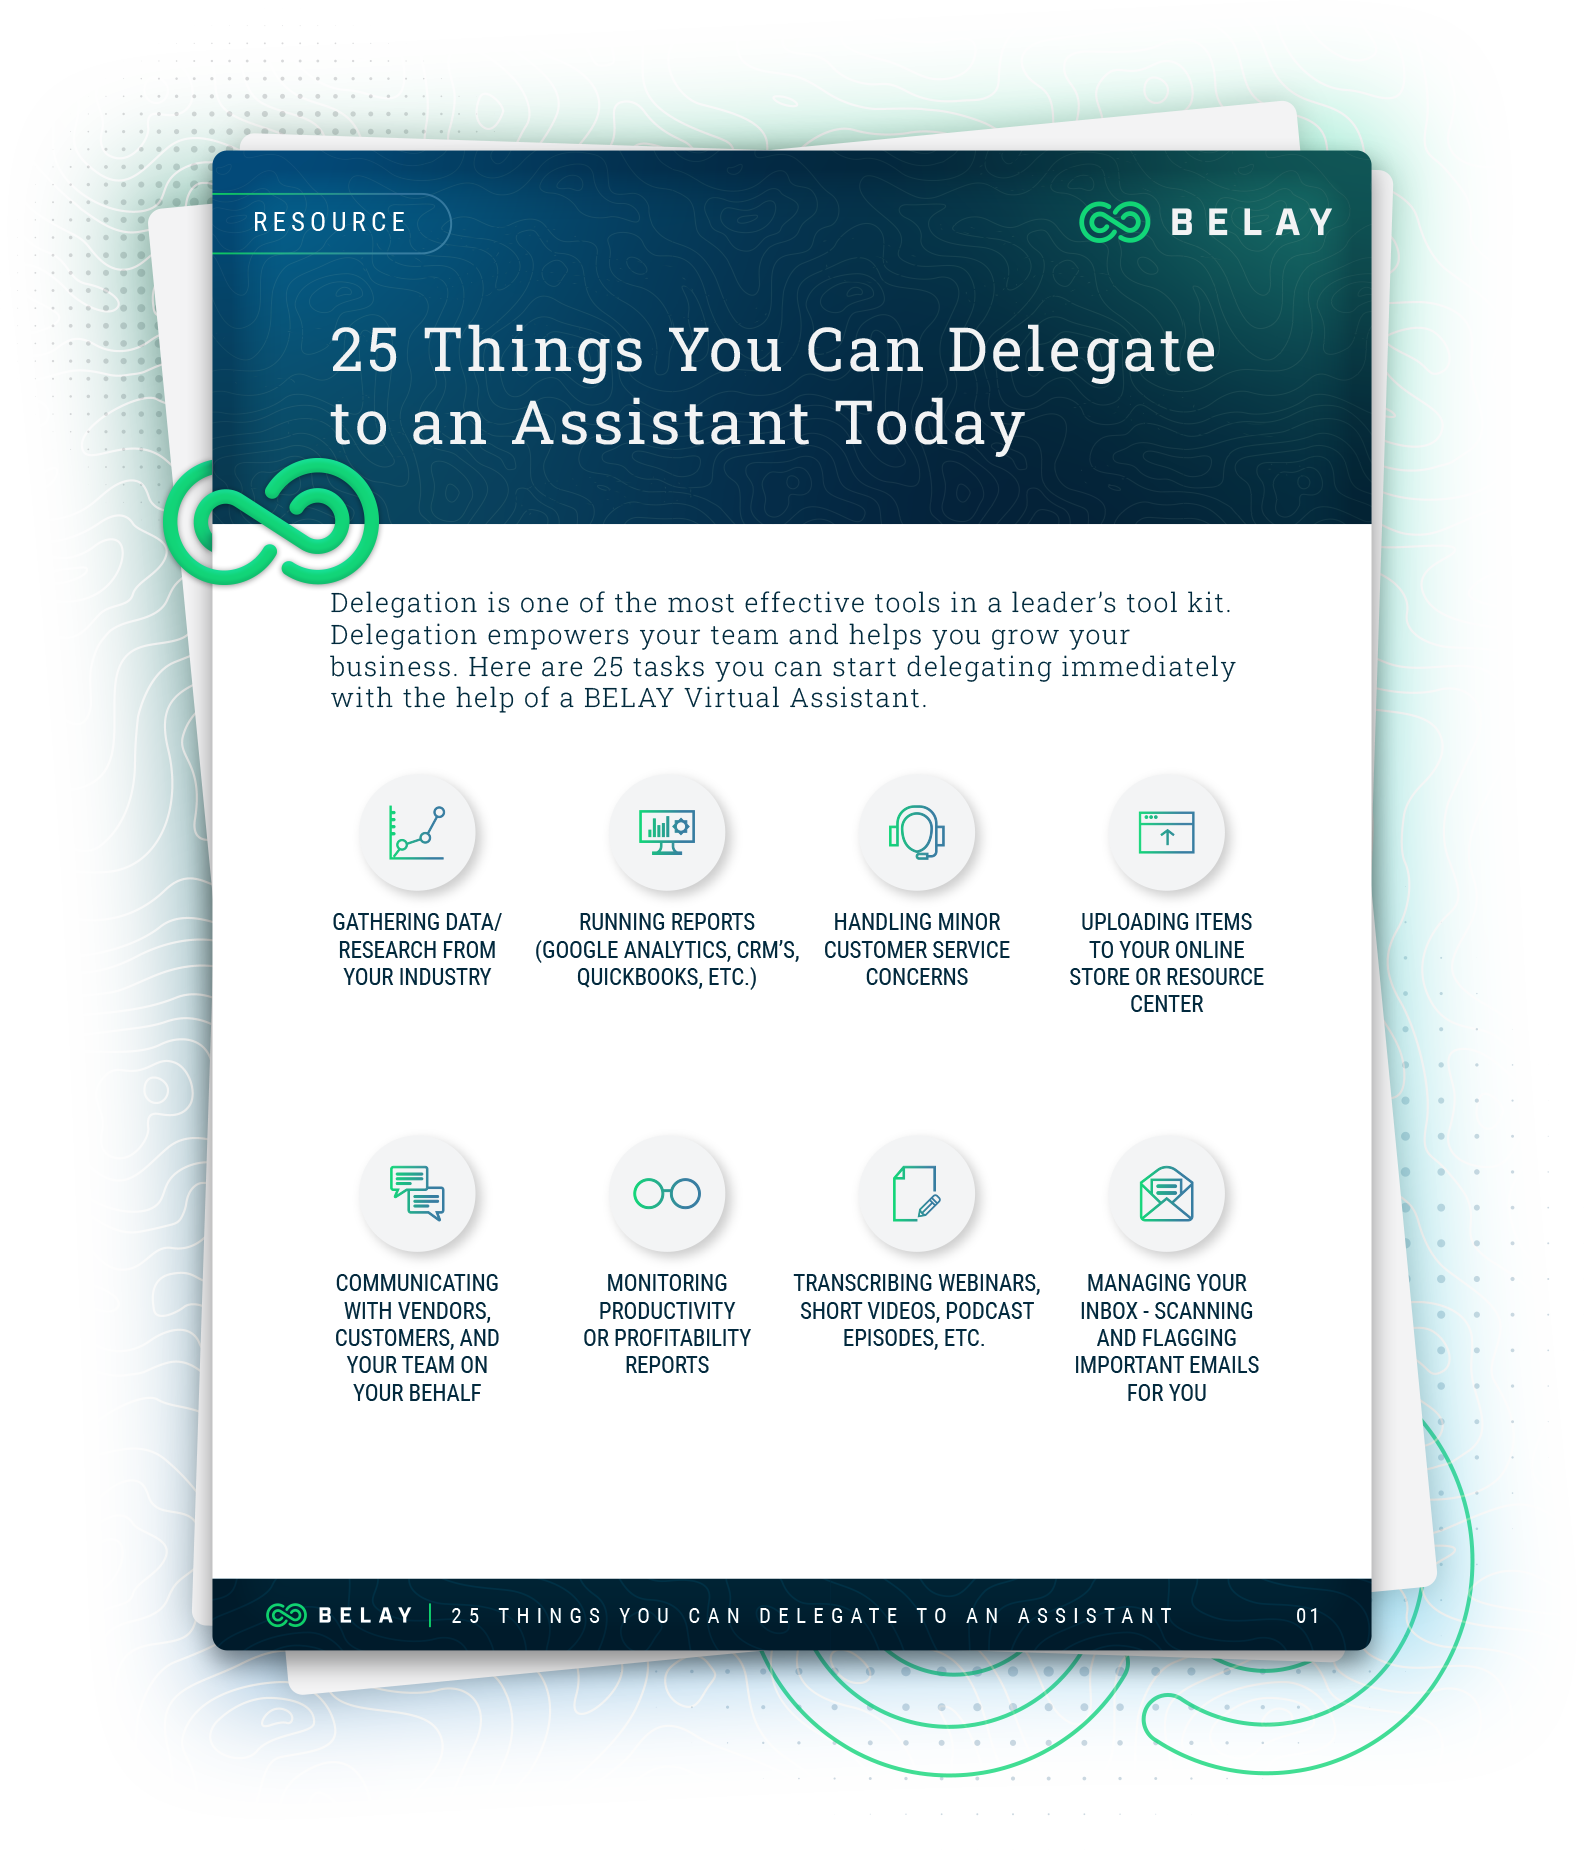 25 Things You Can Delegate to an Assistant Today